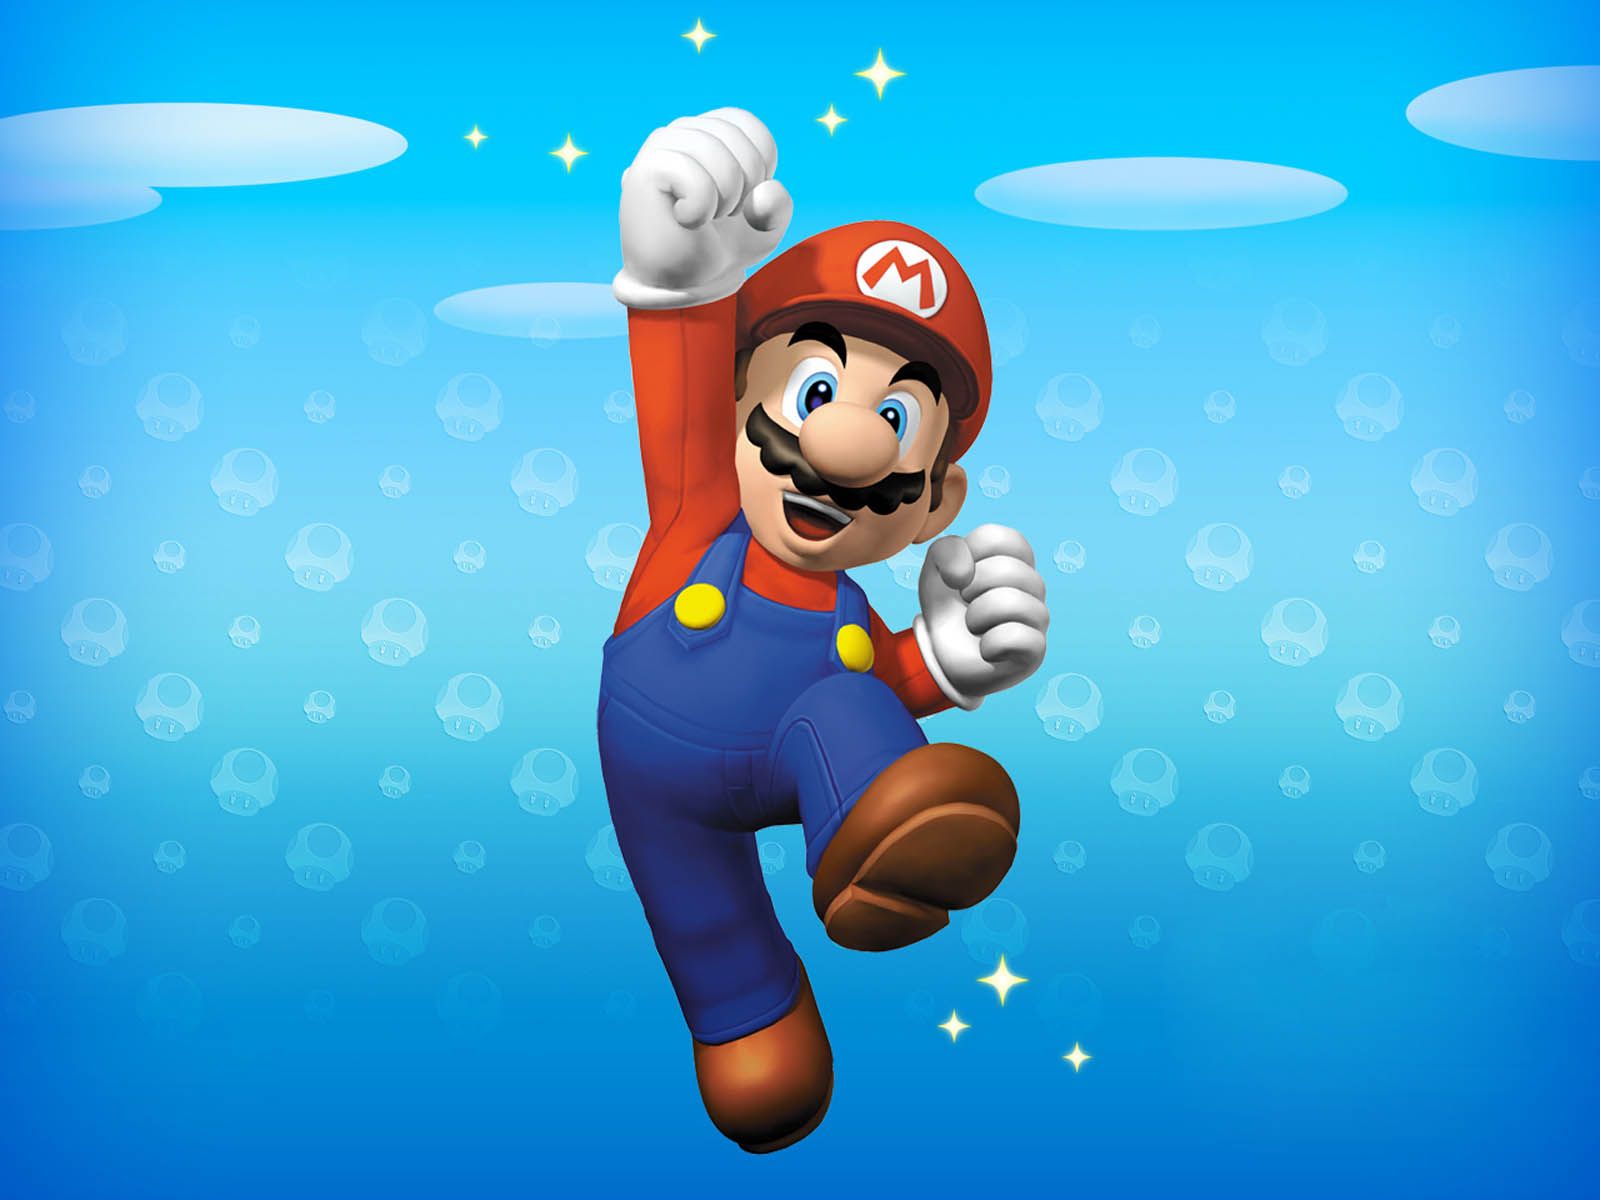 Free download Tag Super Mario Wallpaper Image Photo Picture and Background [1600x1200] for your Desktop, Mobile & Tablet. Explore Super Mario Wallpaper Image. Super HD Wallpaper, Nintendo Wallpaper, Mario Bros Wallpaper